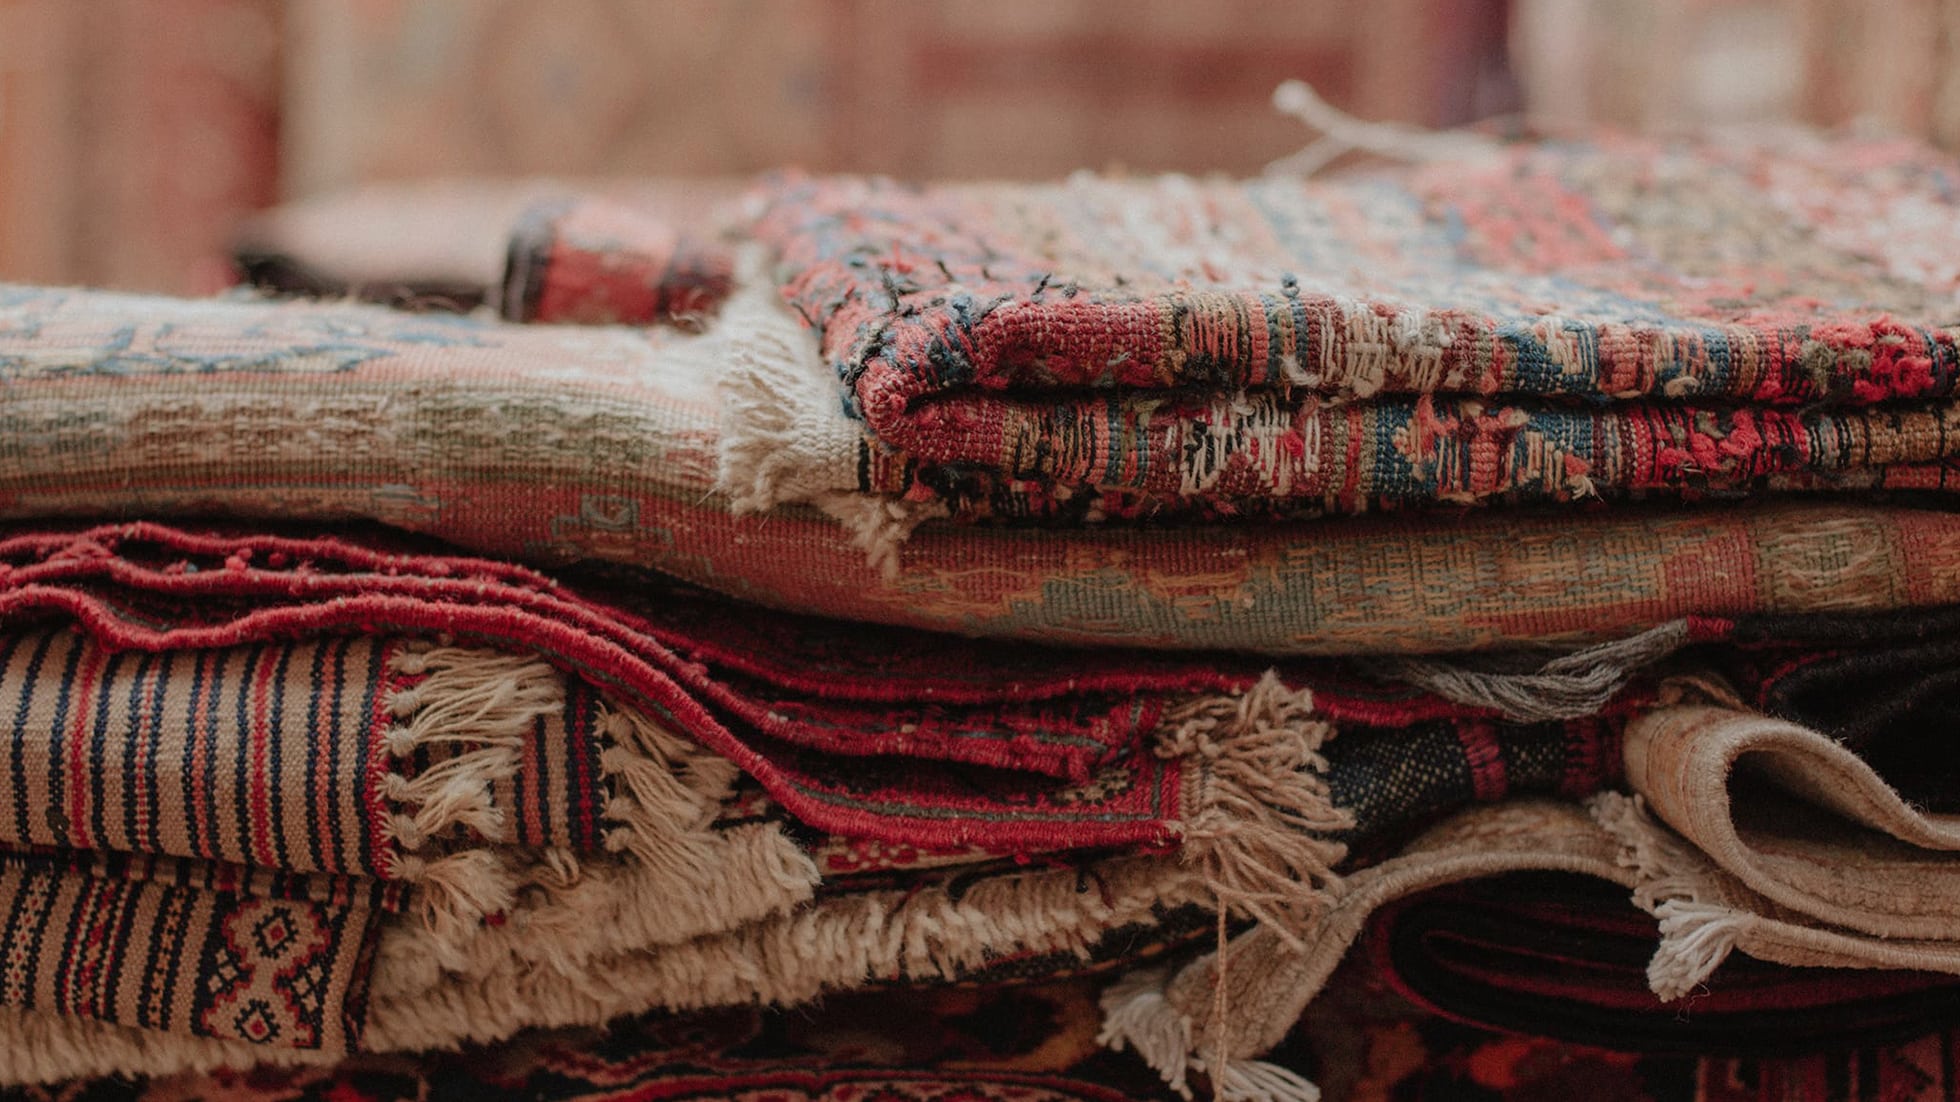 Handmade folded red Turkish Kilim Rugs in traditional patterns and colors